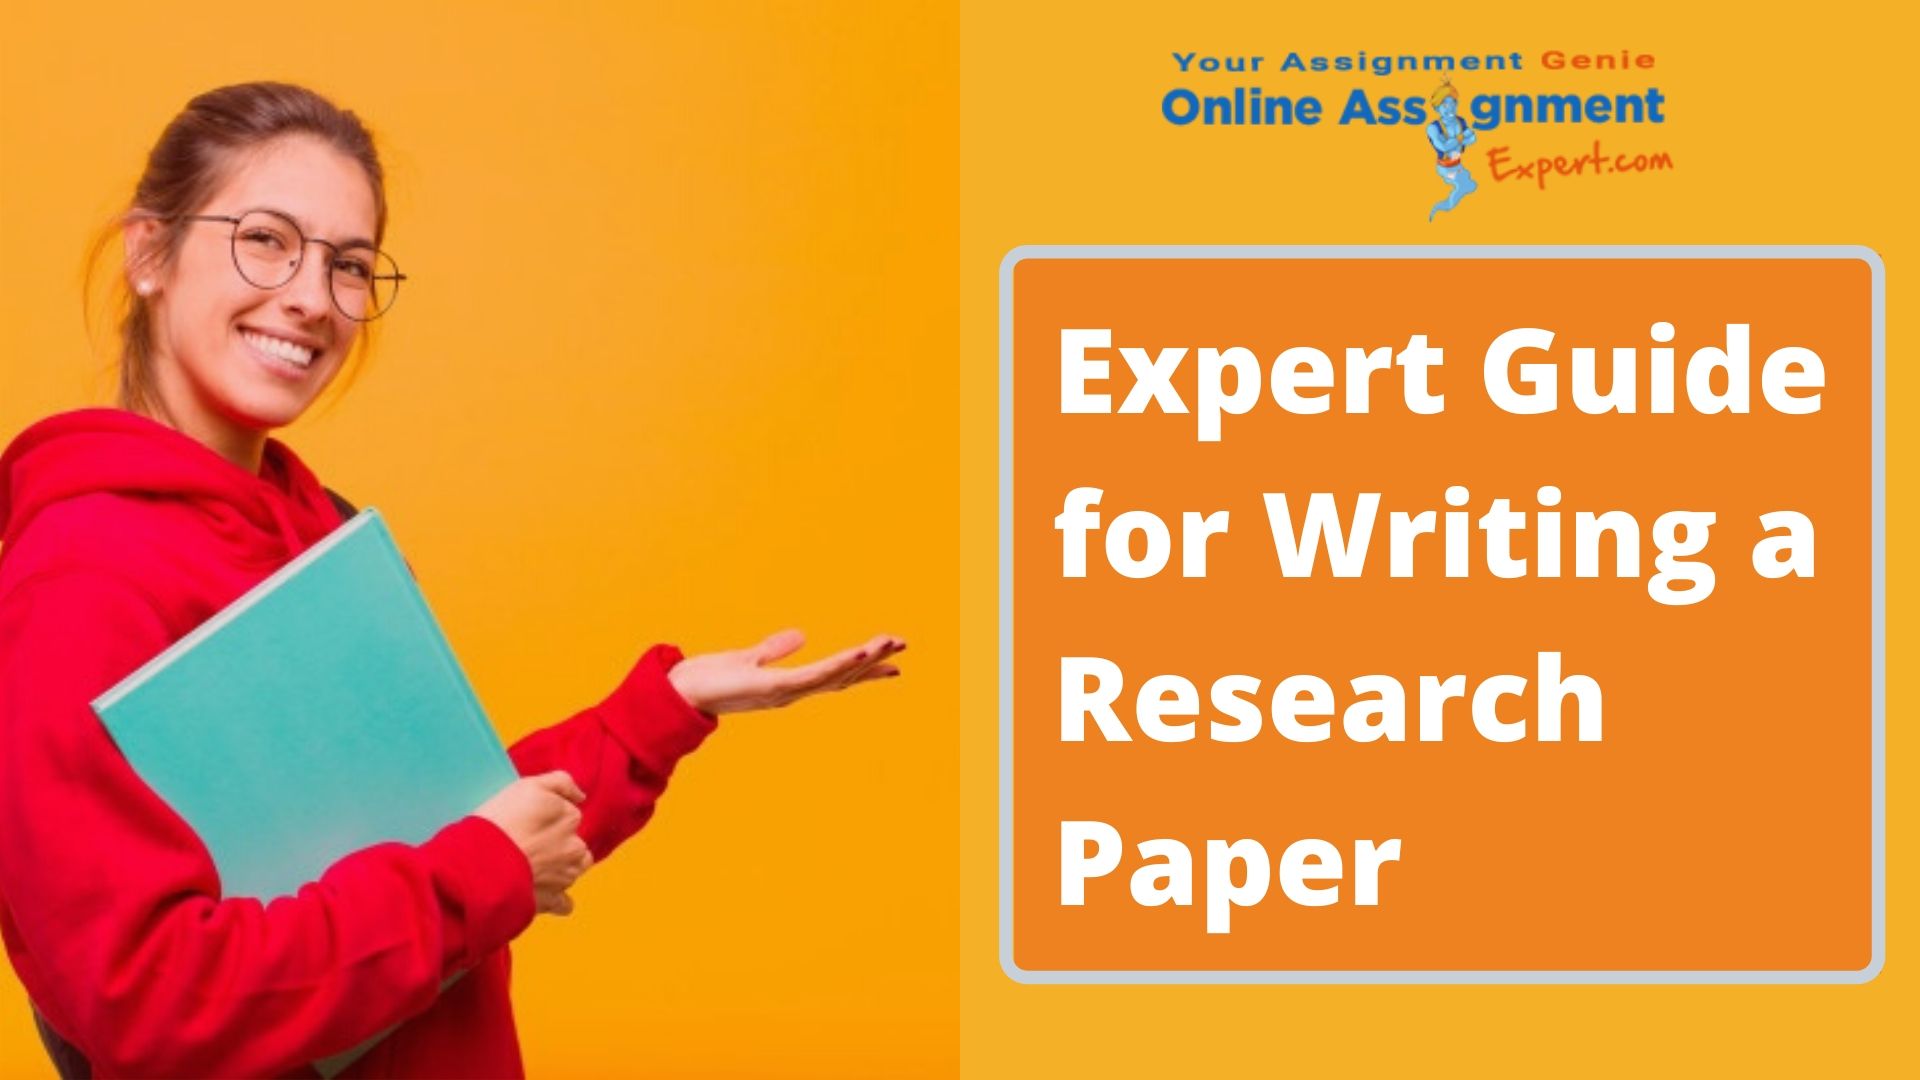 Expert Guide for Writing a Research Paper